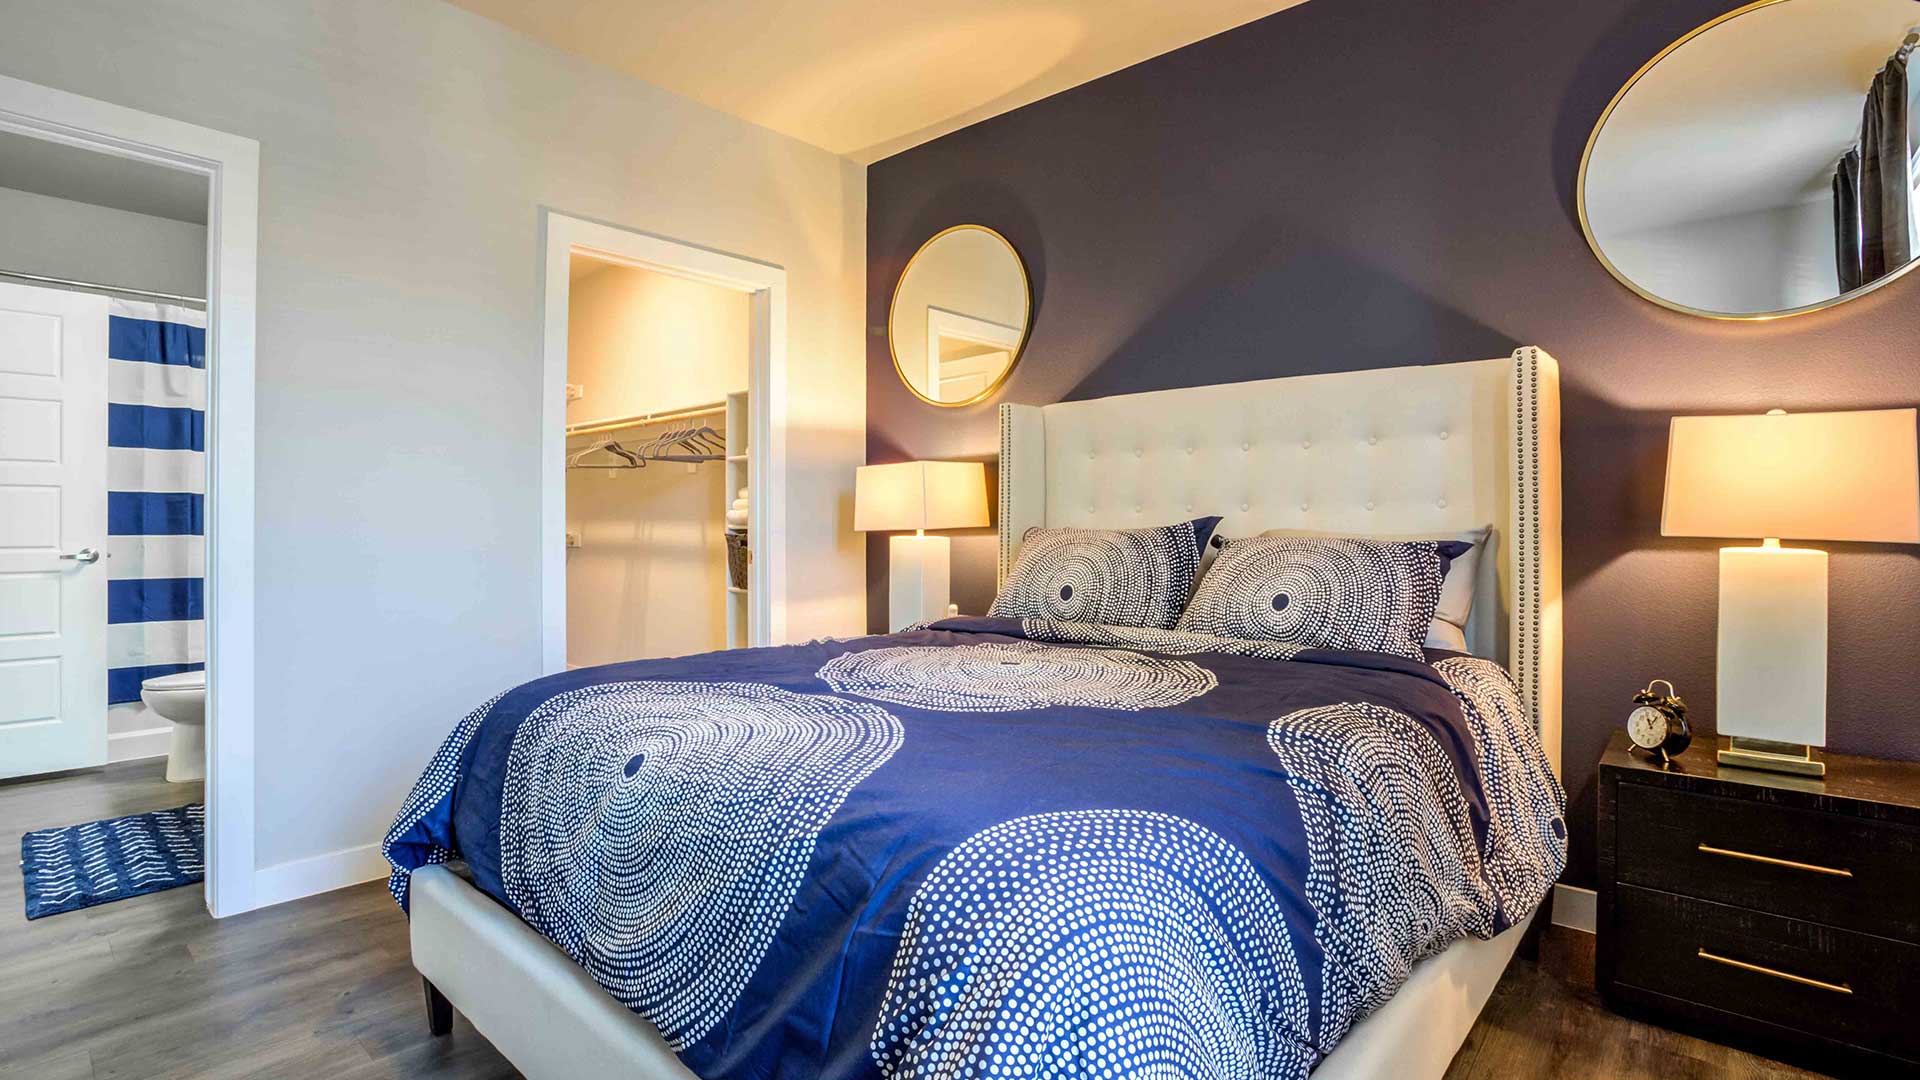 Modern bedroom with a white tufted headboard, navy blue bedding, round mirrors on a dark blue wall, and wooden nightstands with lamps.